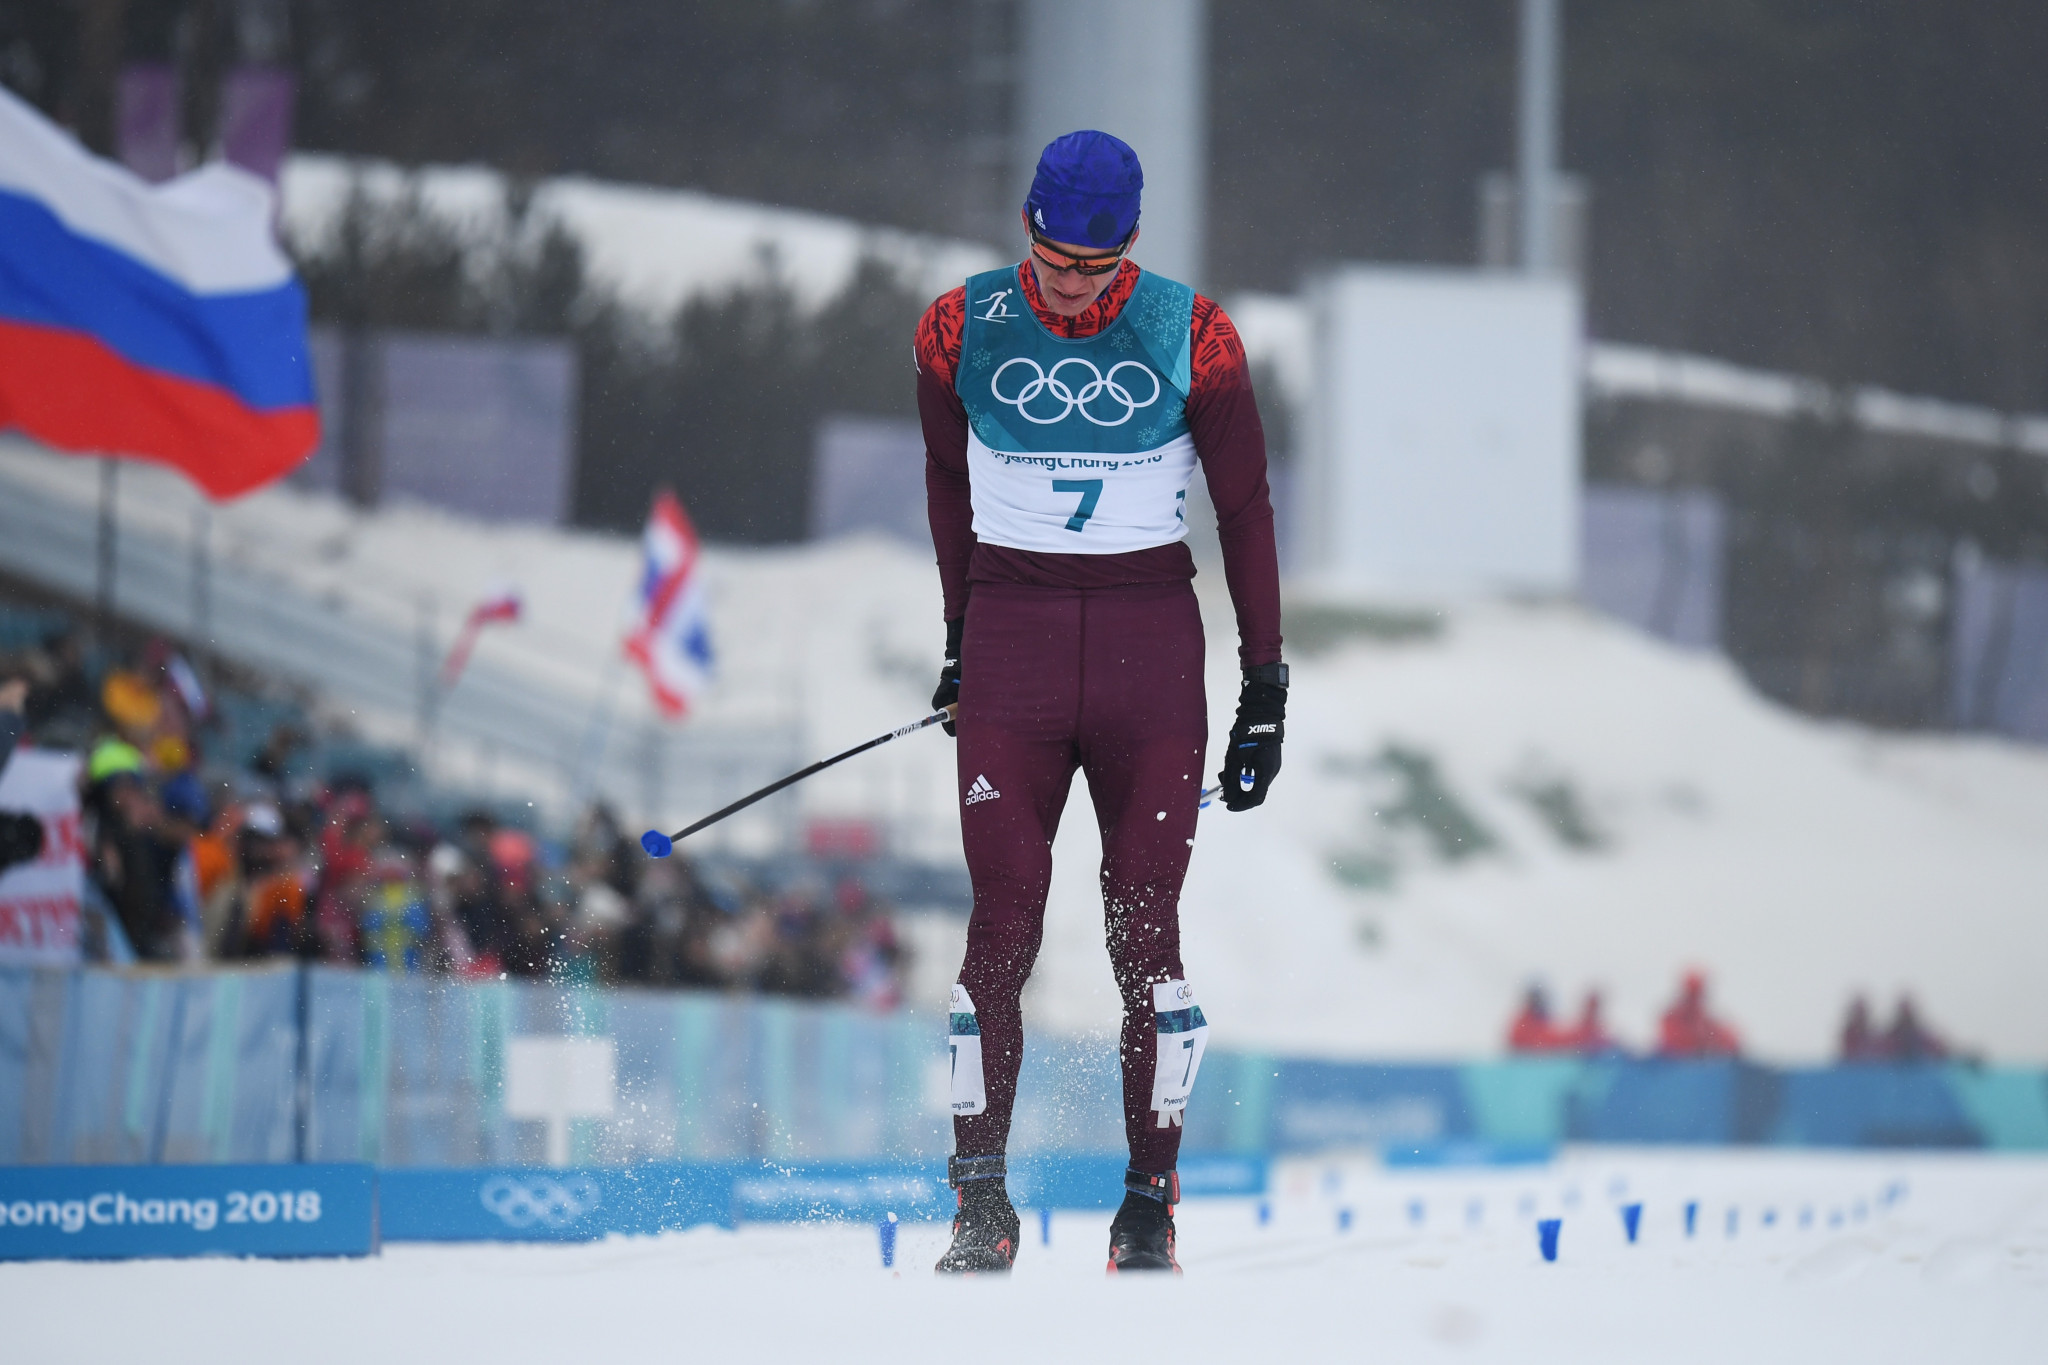 Alexander Bolshunov will be one of the favourites in the men's competition with the absence of Norway and Sweden ©Getty Images